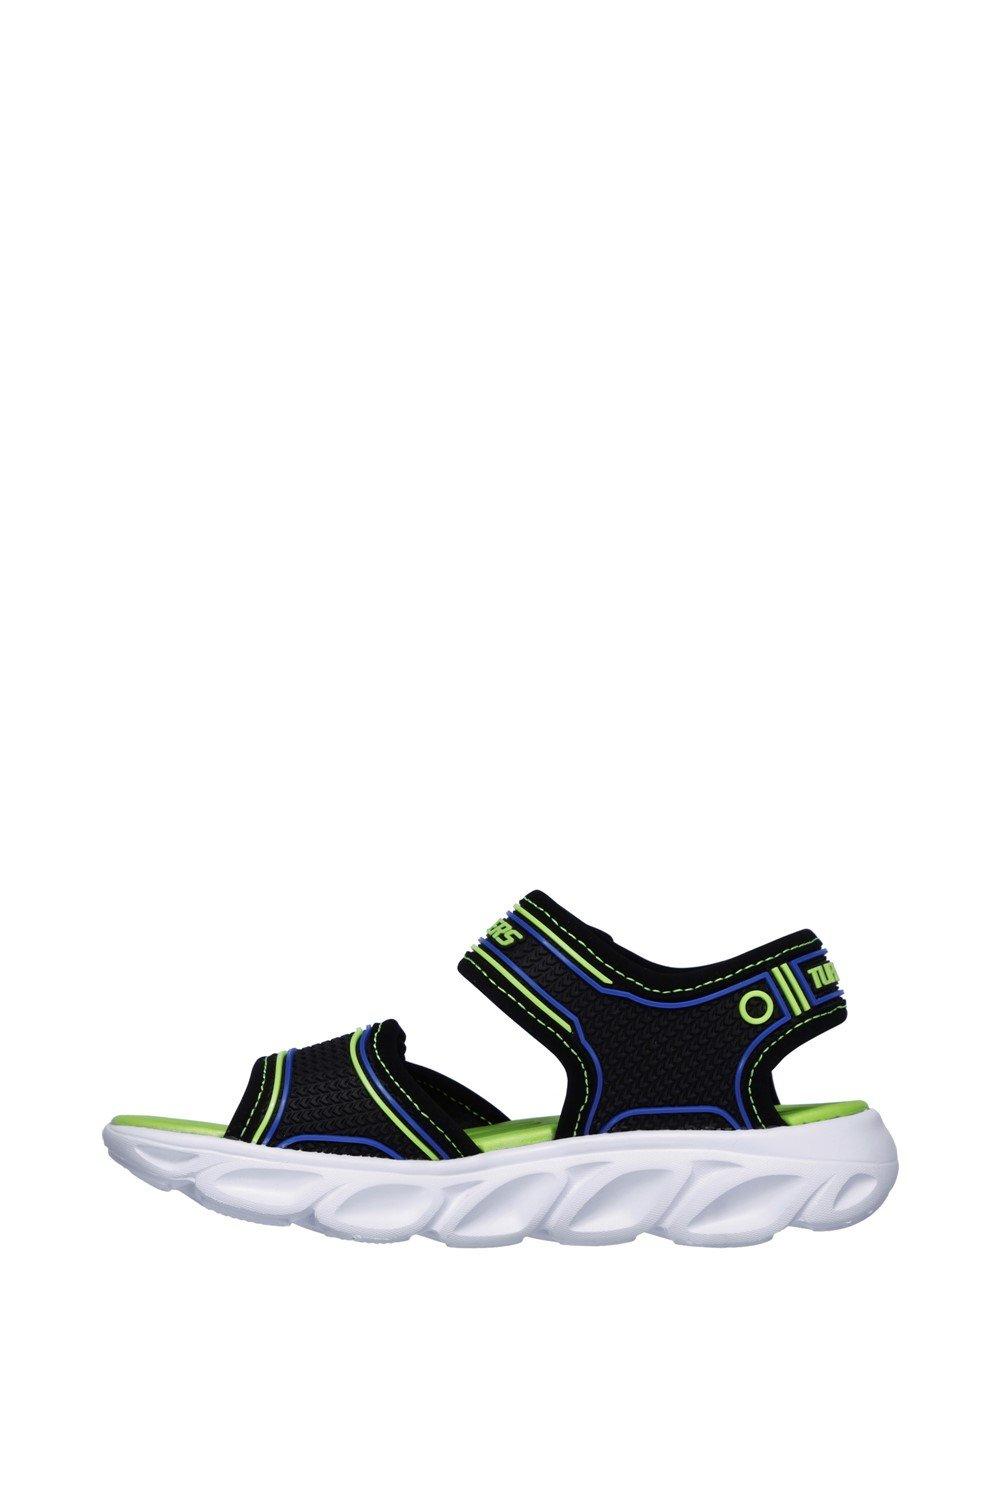 Skechers 'Hypno-Flash 3.0' Synthetic Sandals